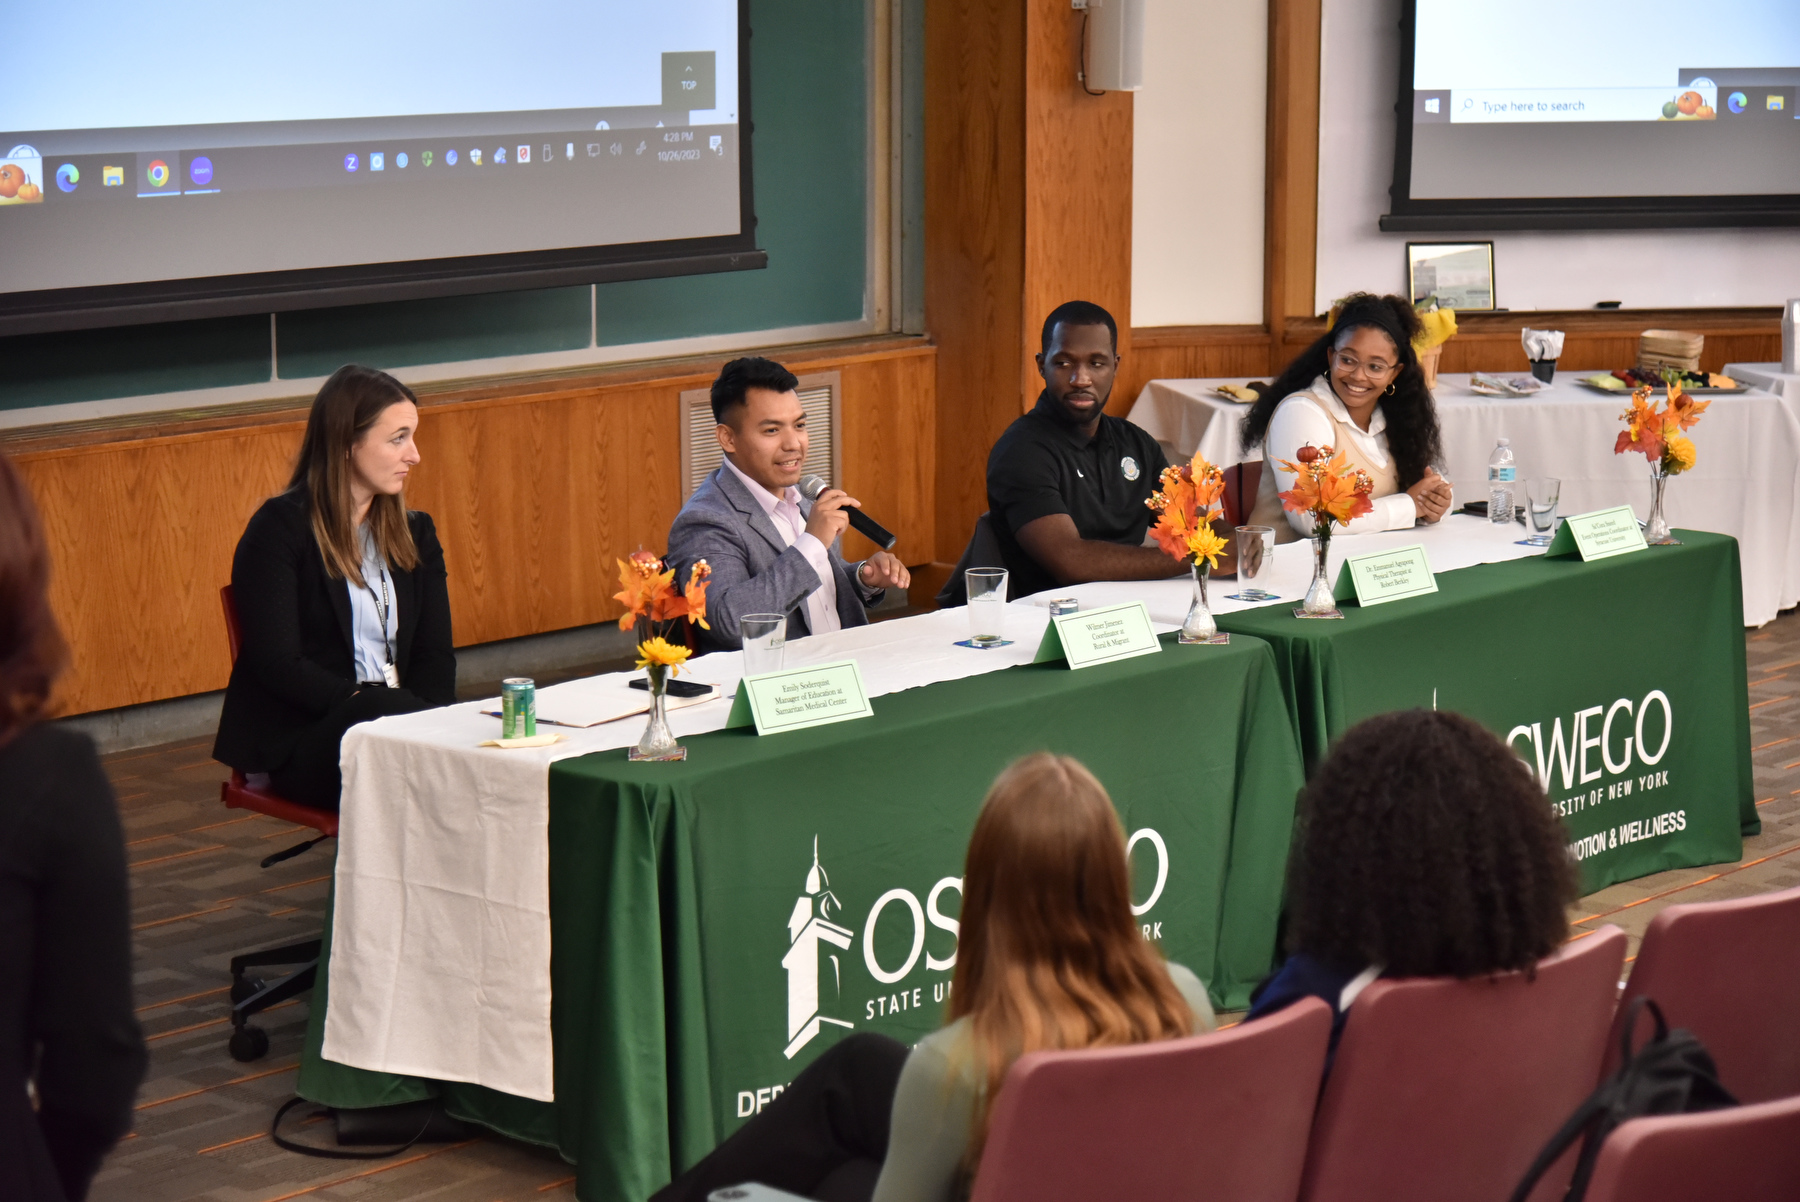 Career and networking panels held on campus Oct. 26 provided current students a look at many disciplines and fields of interest. Small group-format discussions were led by area professionals, many of whom are Oswego alumni. 